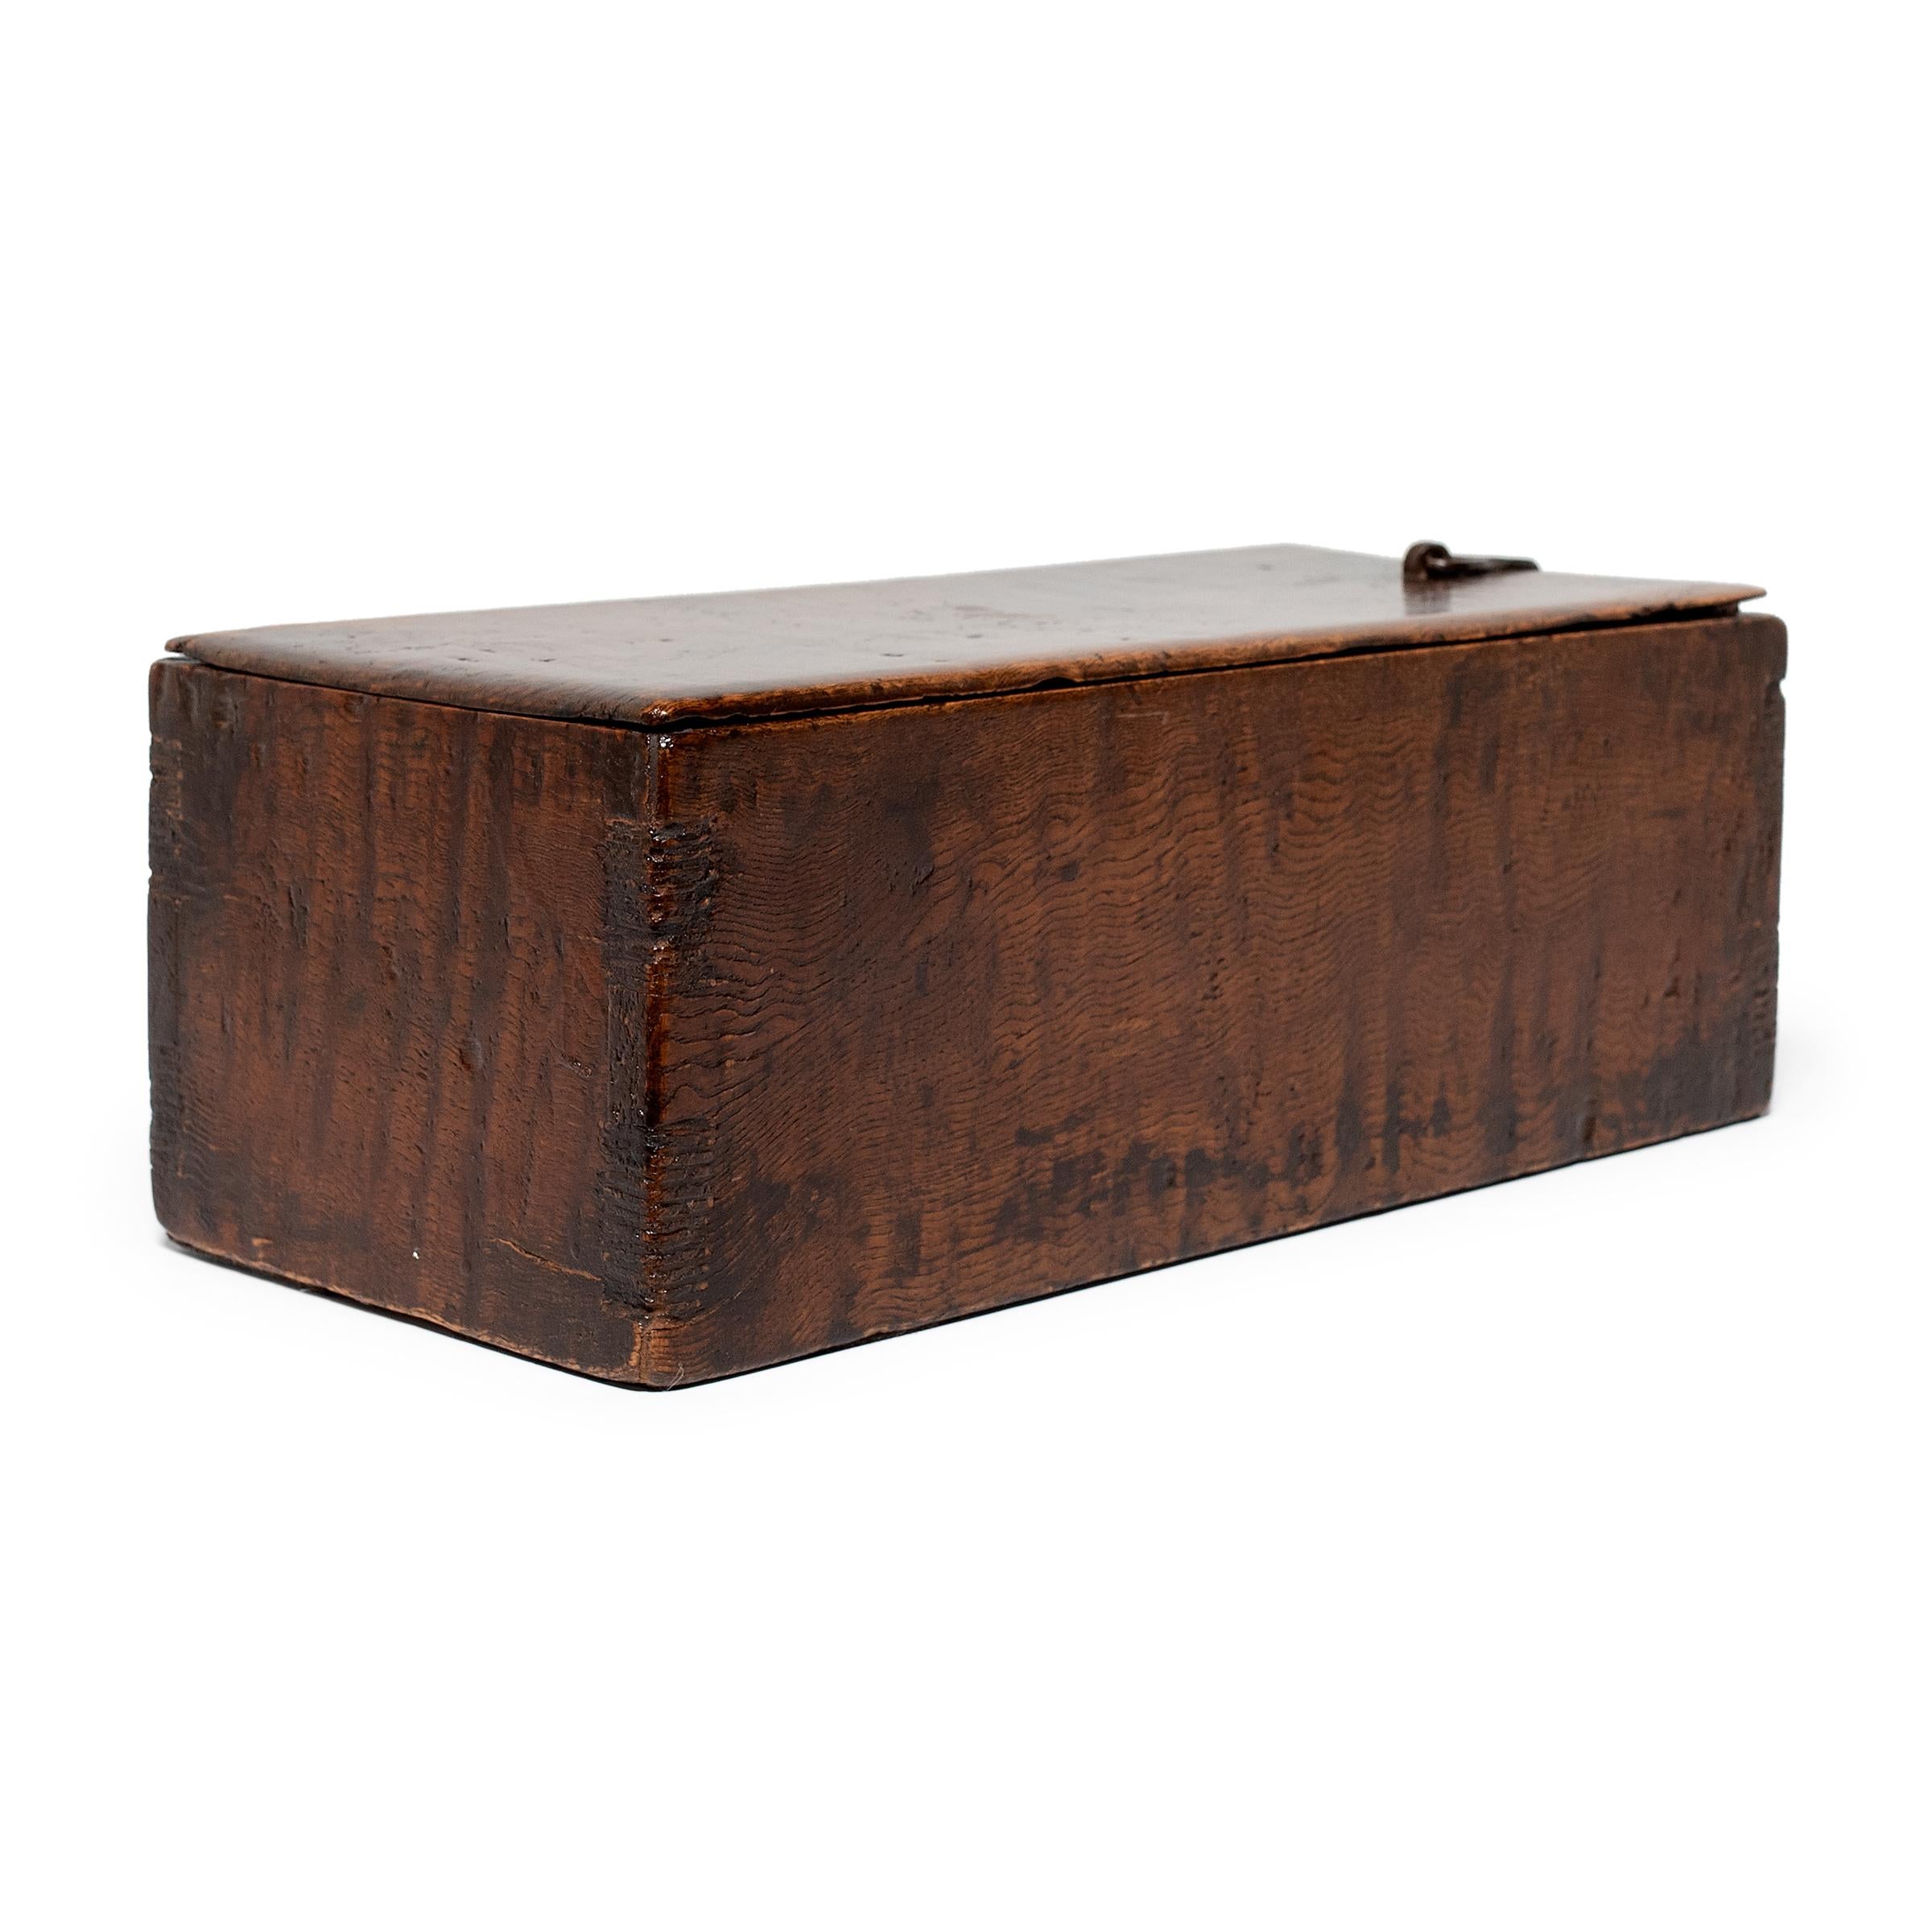 Crafted from a beautiful specimen of burled northern elm (yumu), this wooden document box likely once sat in the studio of a Qing-dynasty scholar-official. The perfect size for a rolled-up scroll, the box was used to store and protect works of